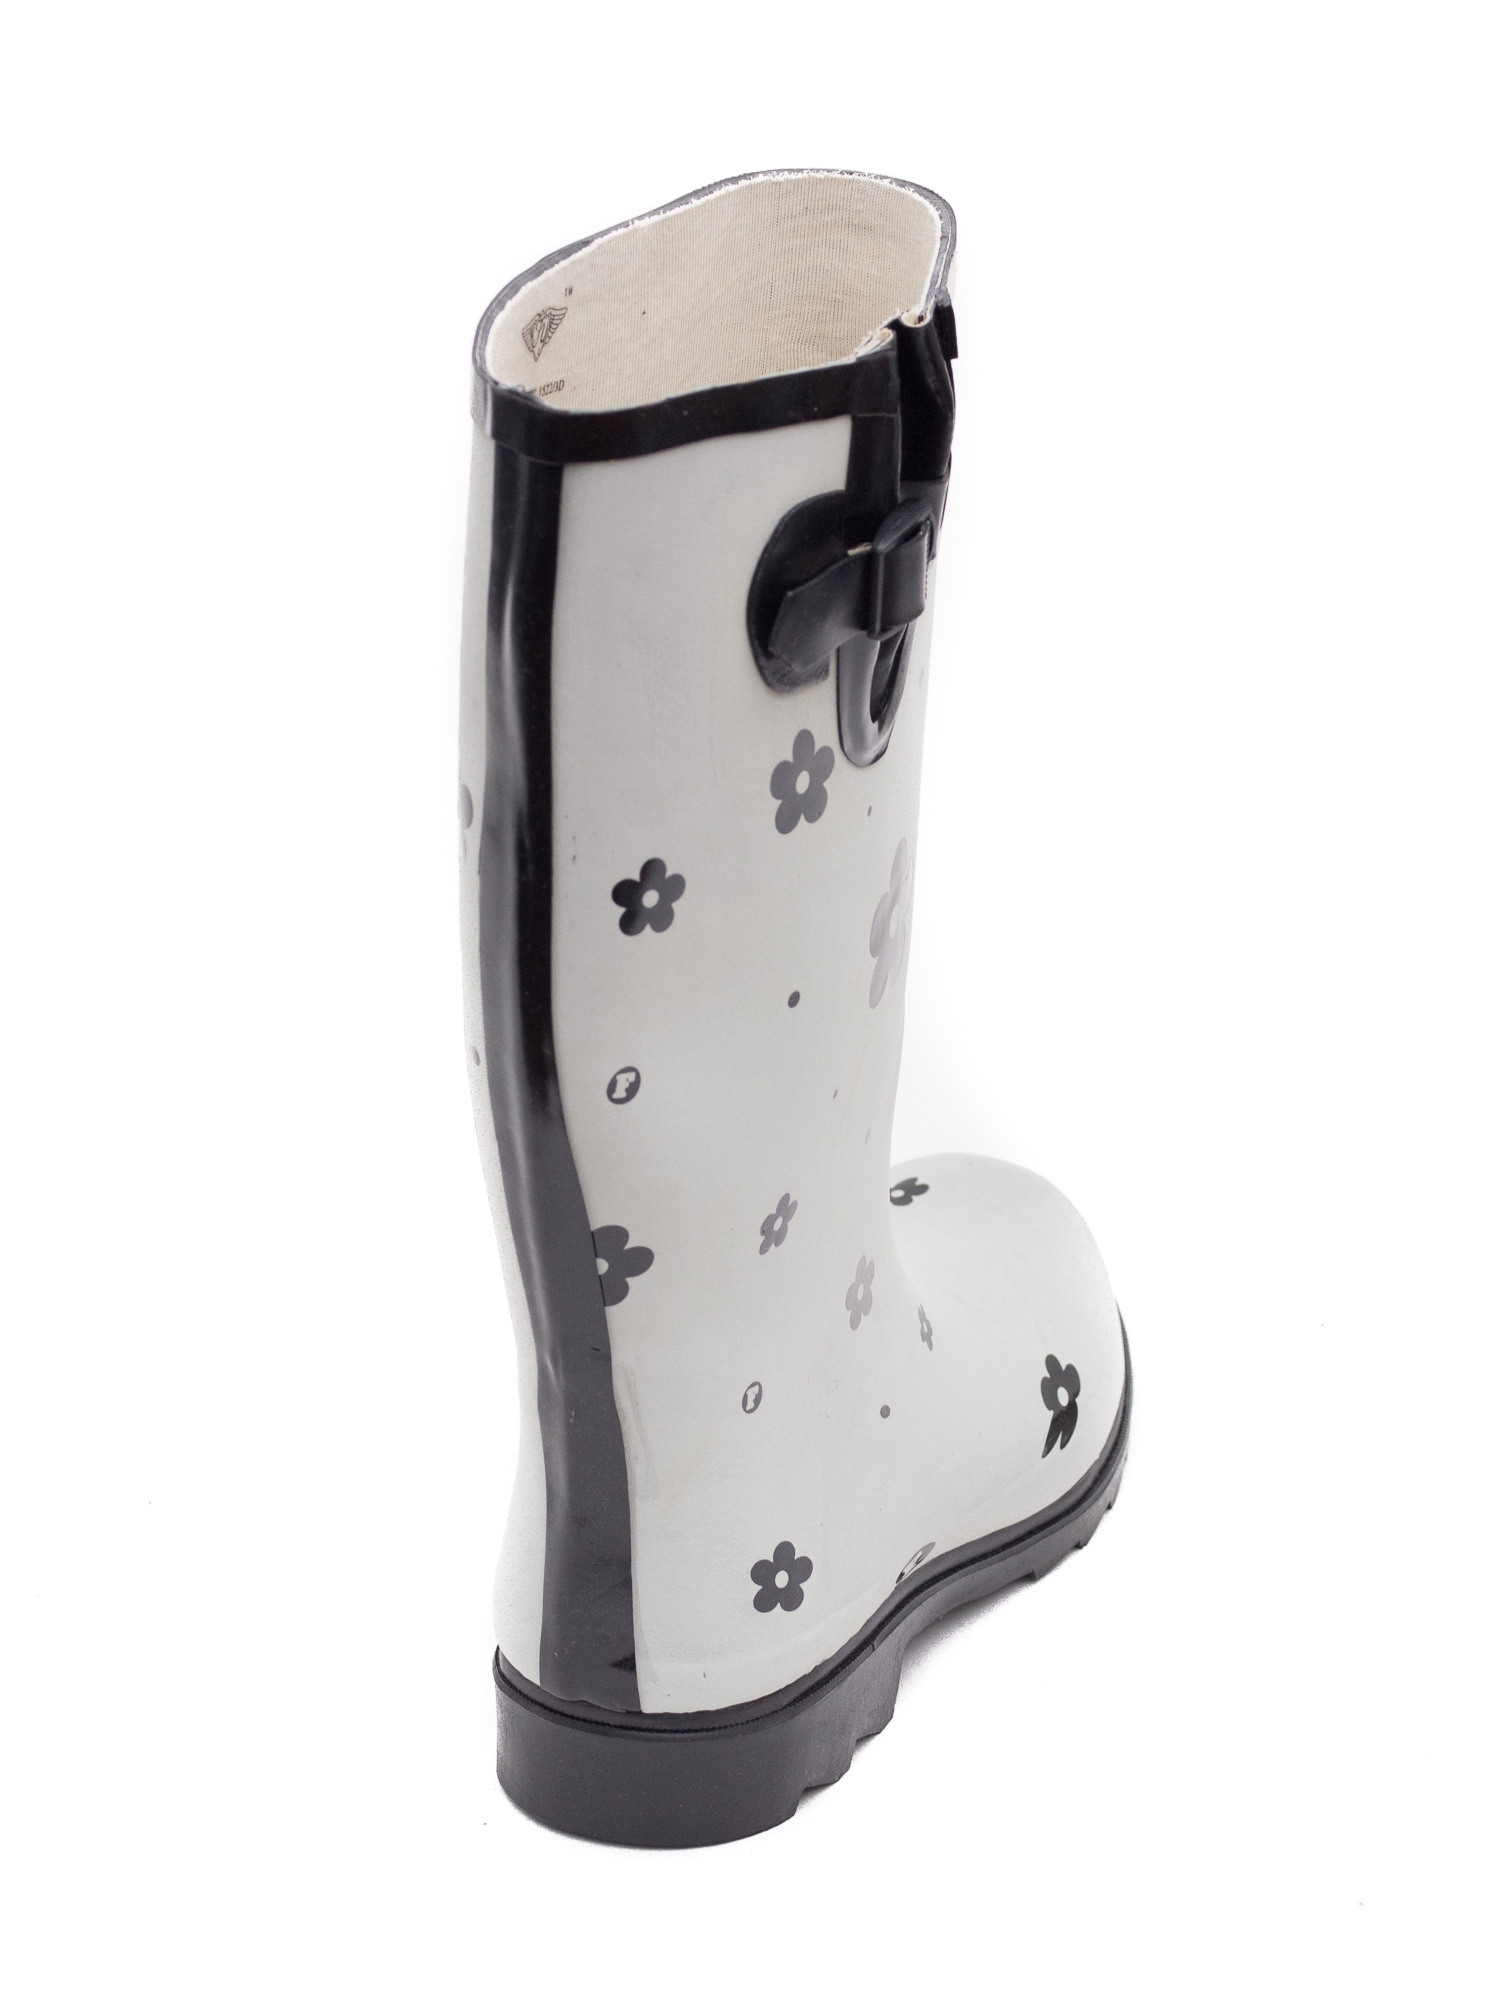 Women Rubber Rain Boots with Cotton Lining, White Flower Matte Design - image 2 of 2